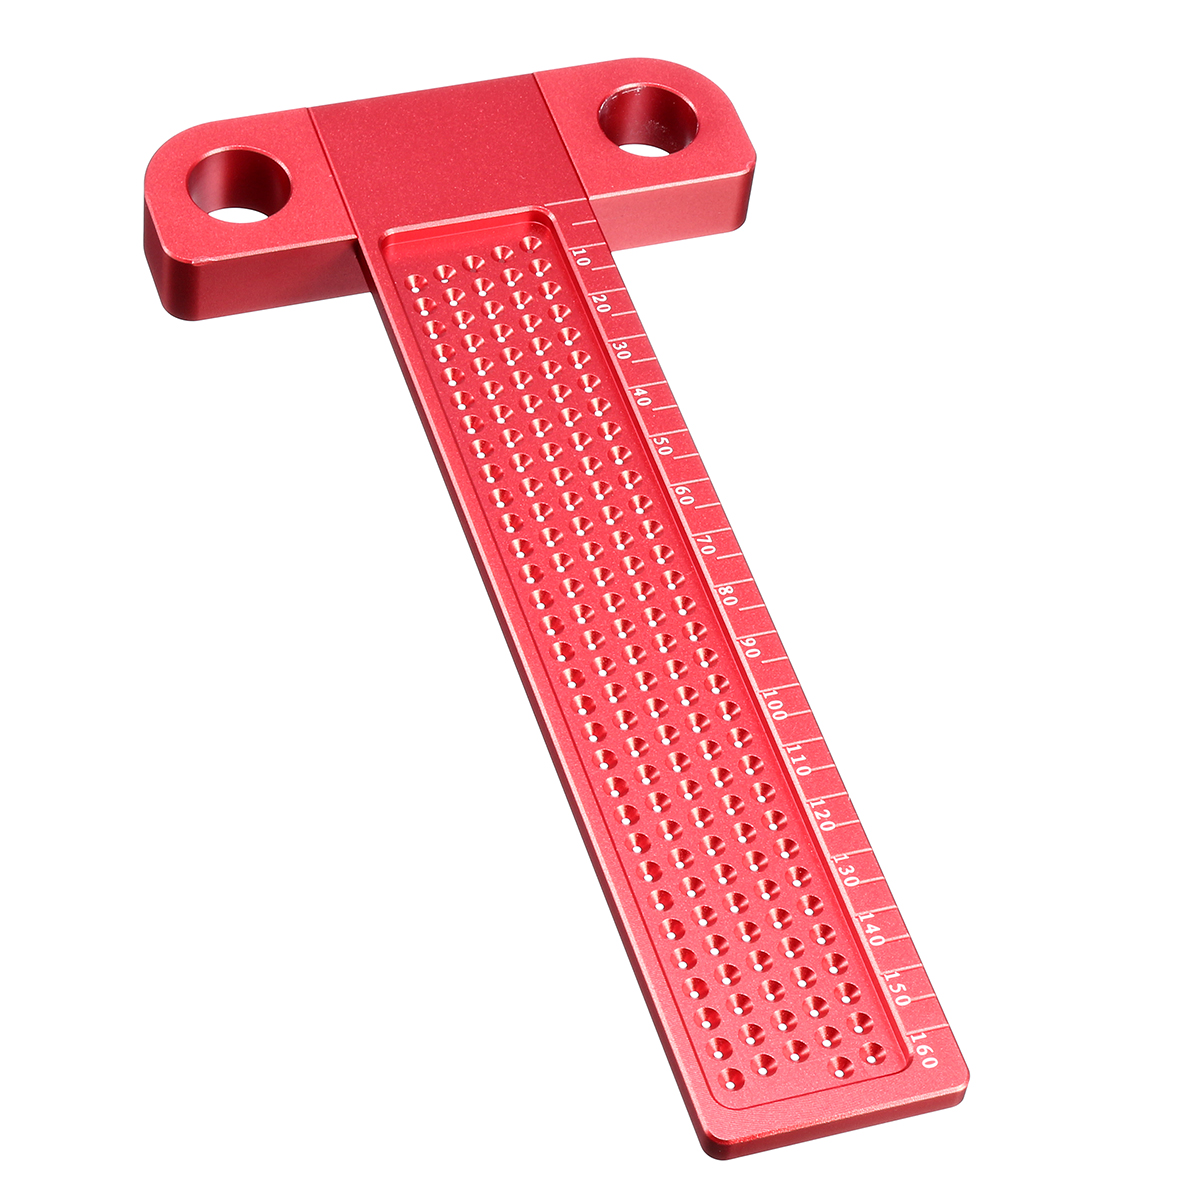 Drillpro-Aluminium-Alloy-T-160-Hole-Positioning-Metric-Measuring-Ruler-Woodworking-Precision-Marking-1324492-2